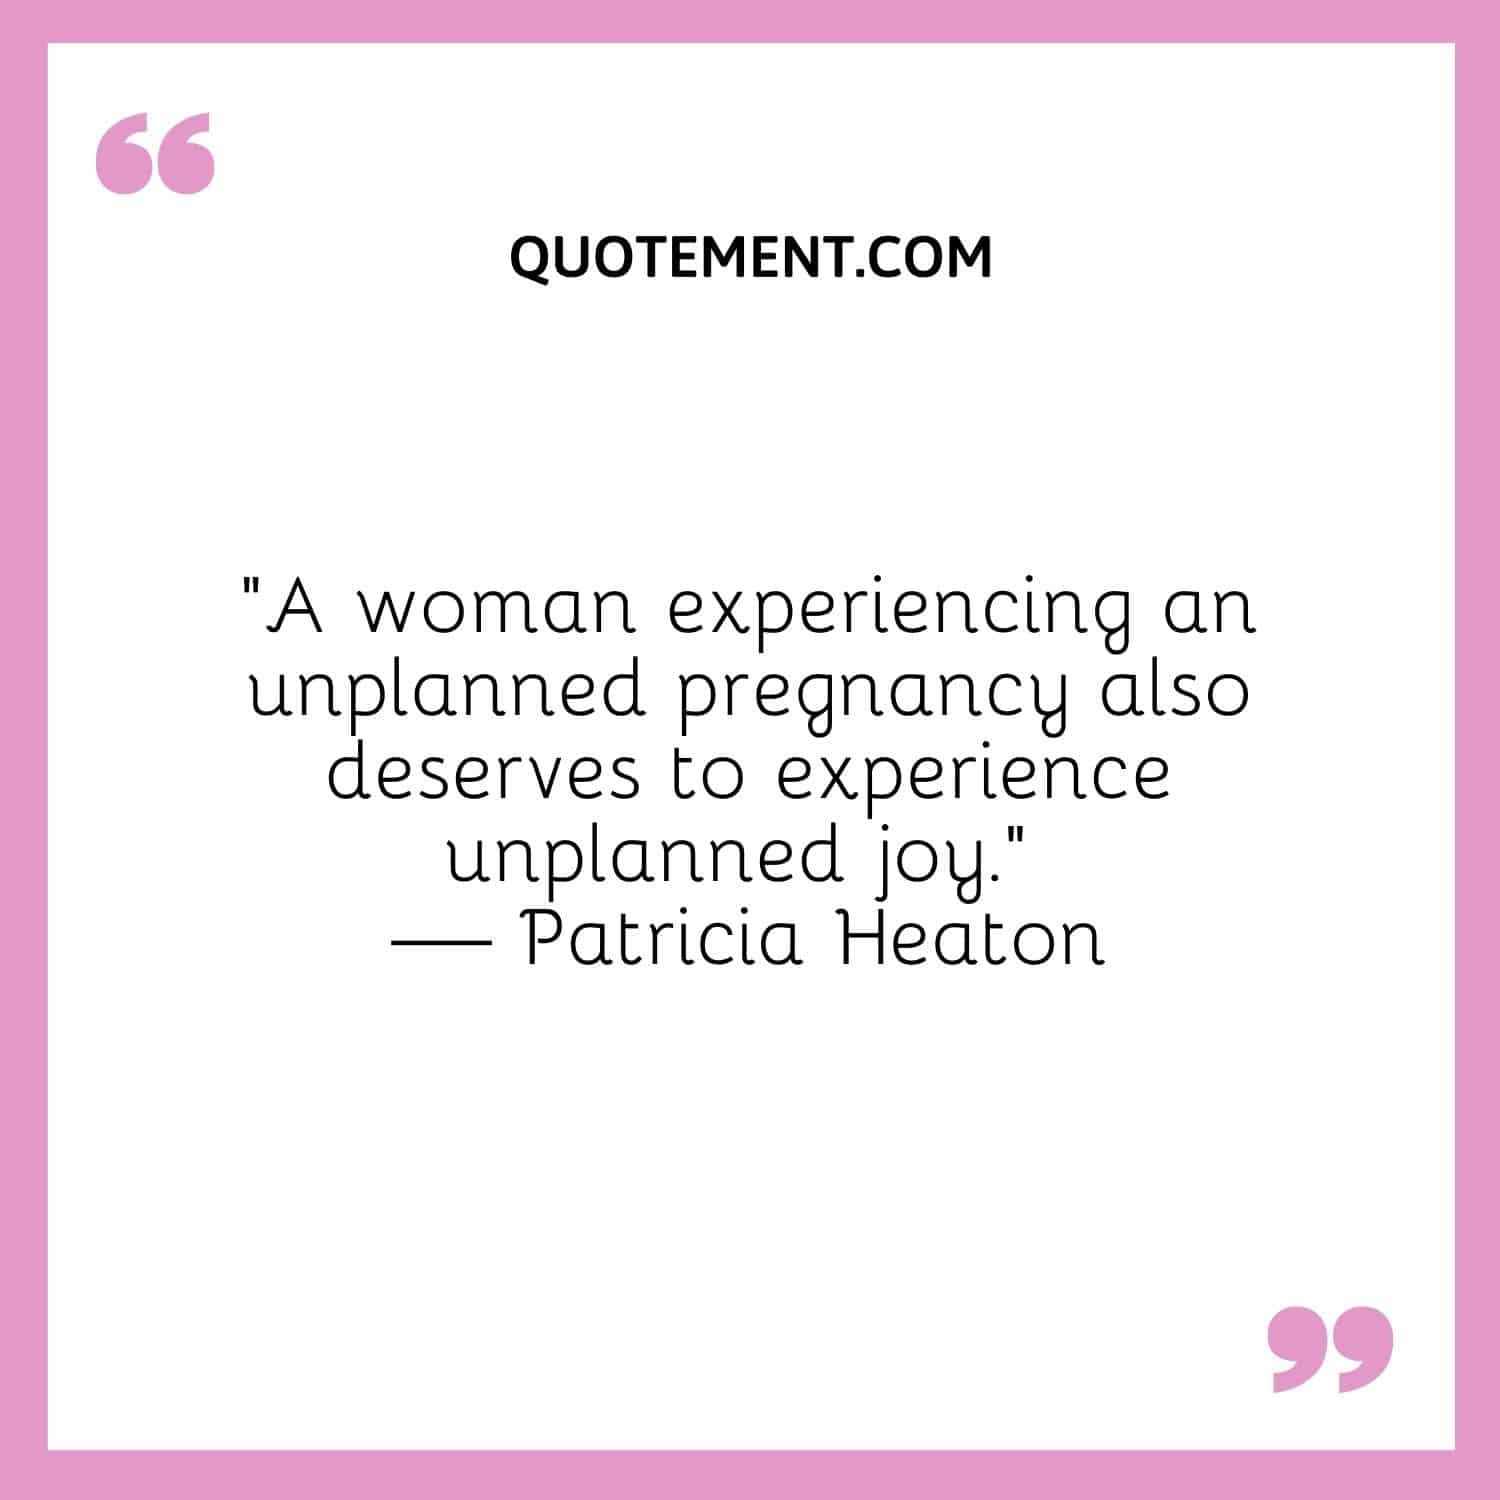 A woman experiencing an unplanned pregnancy also deserves to experience unplanned joy